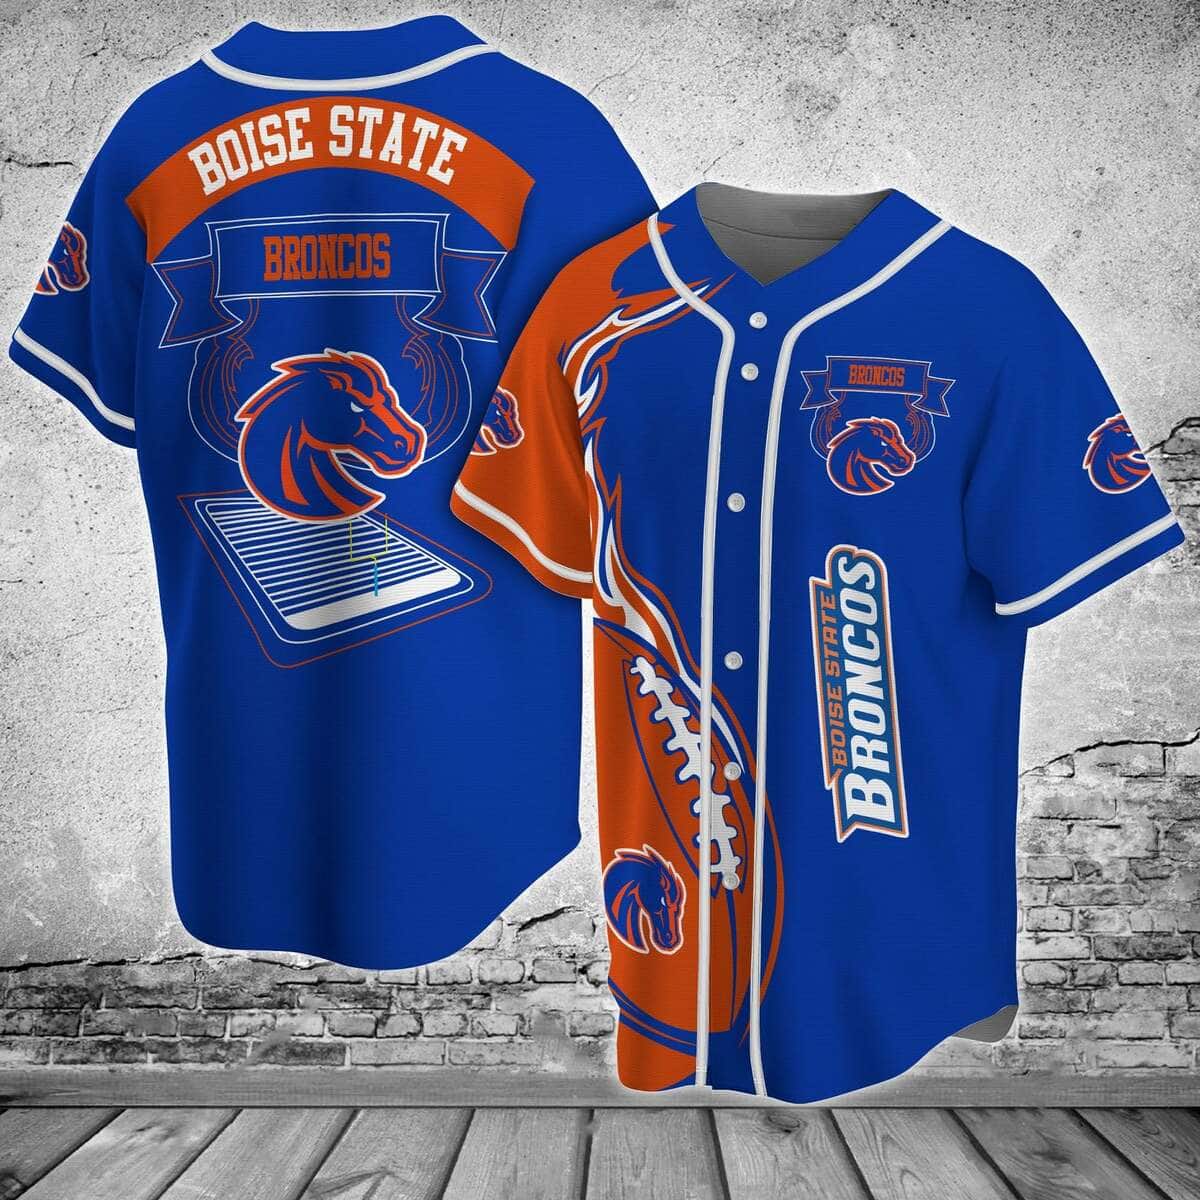 Blue NCAA Boise State Broncos Baseball Jersey Gift For Friends